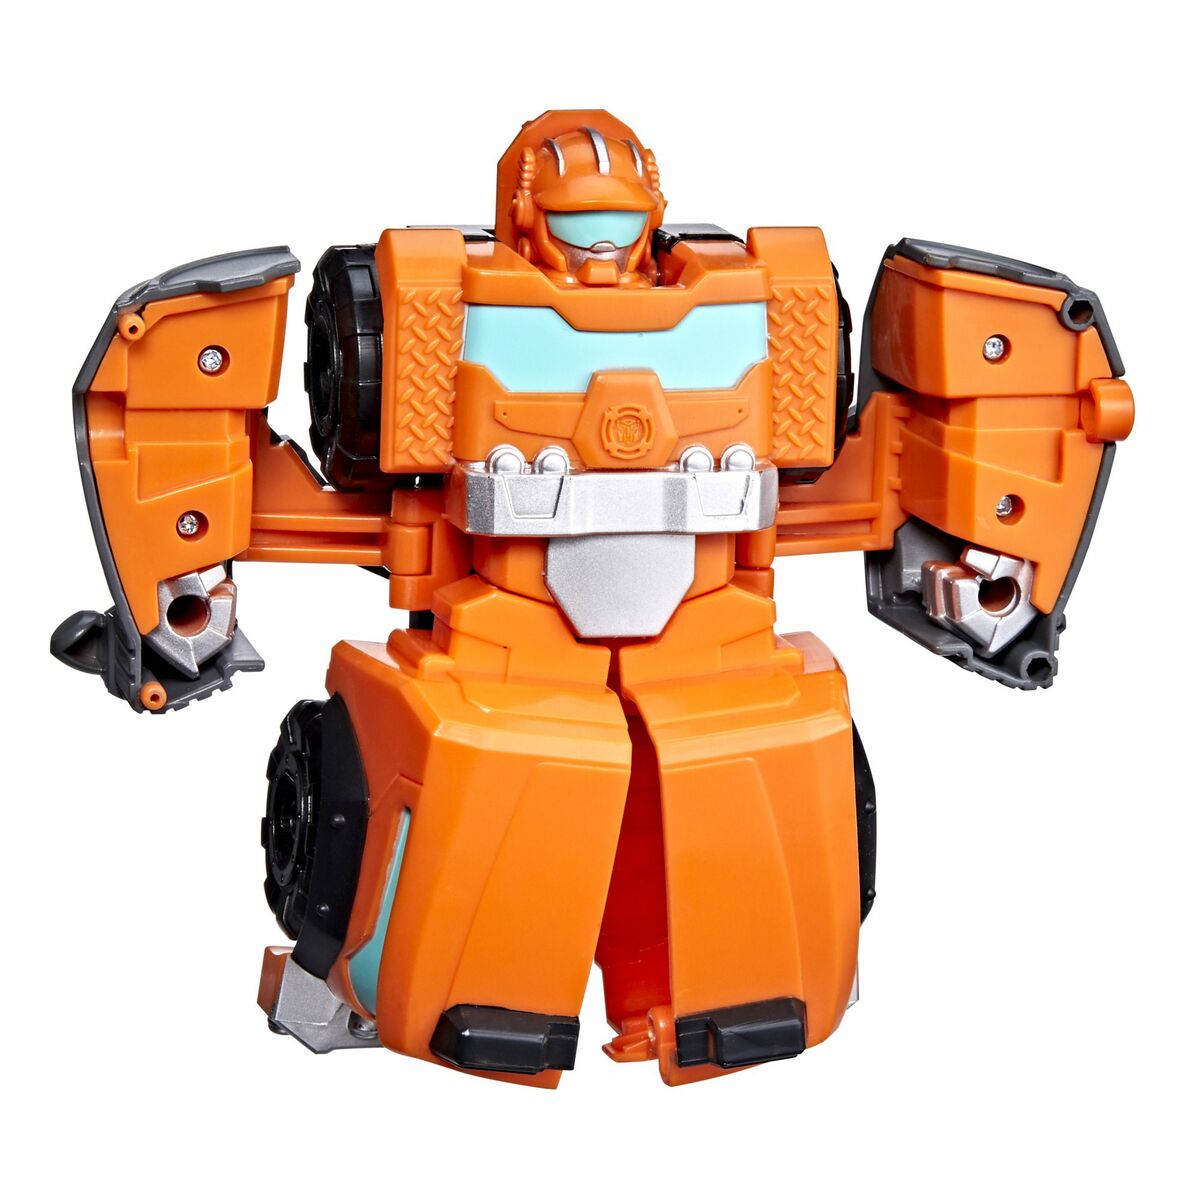 Transformers Rescue Bots Academy Wedge